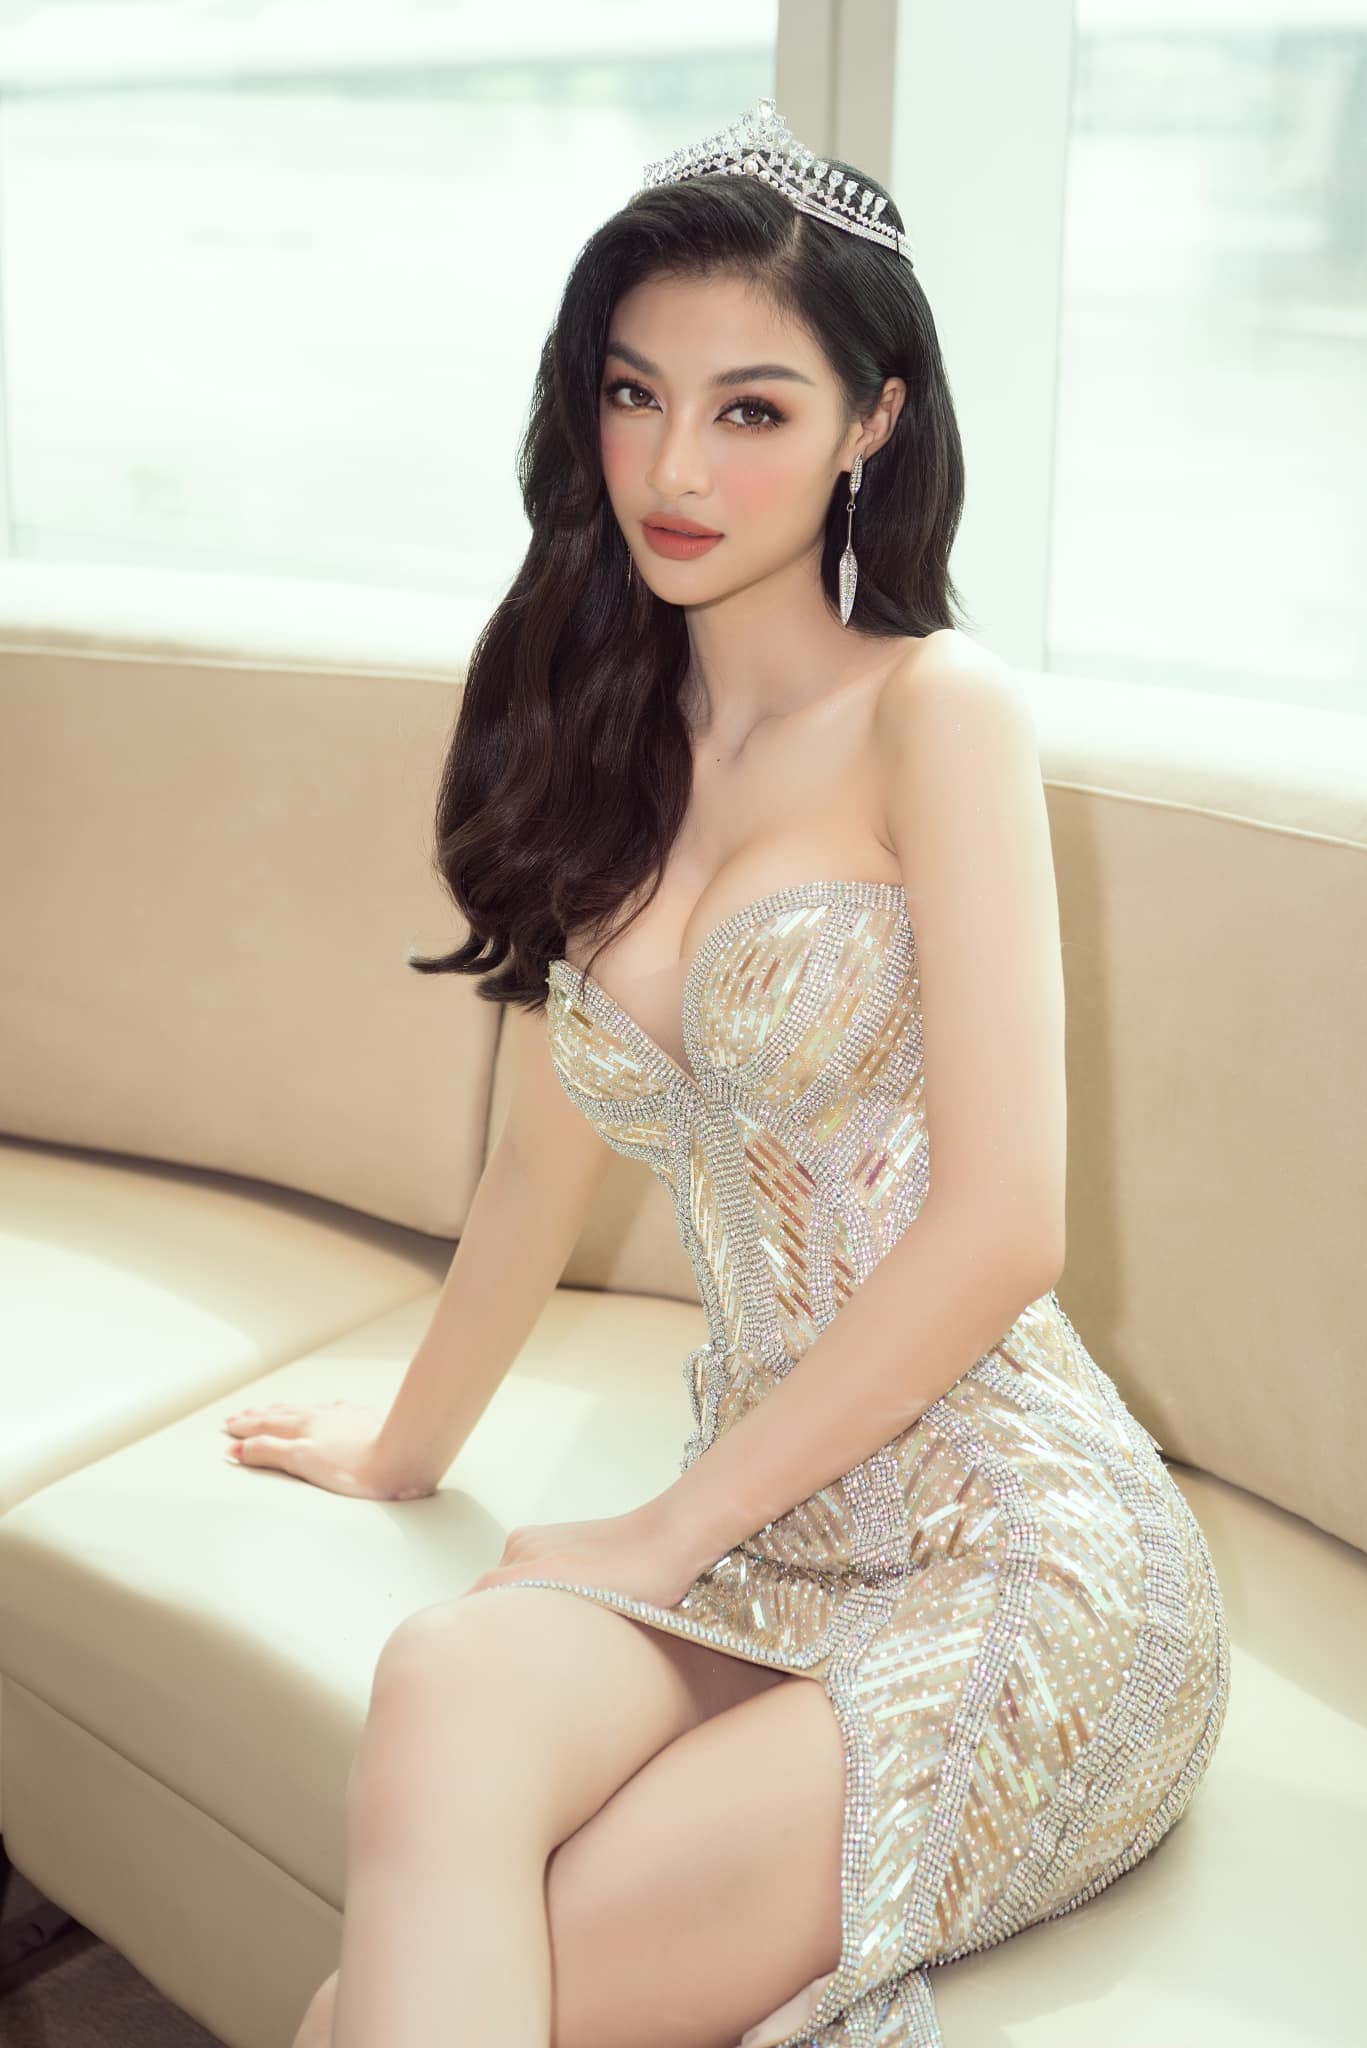 Vietnamese beauties are surprised by a series of 